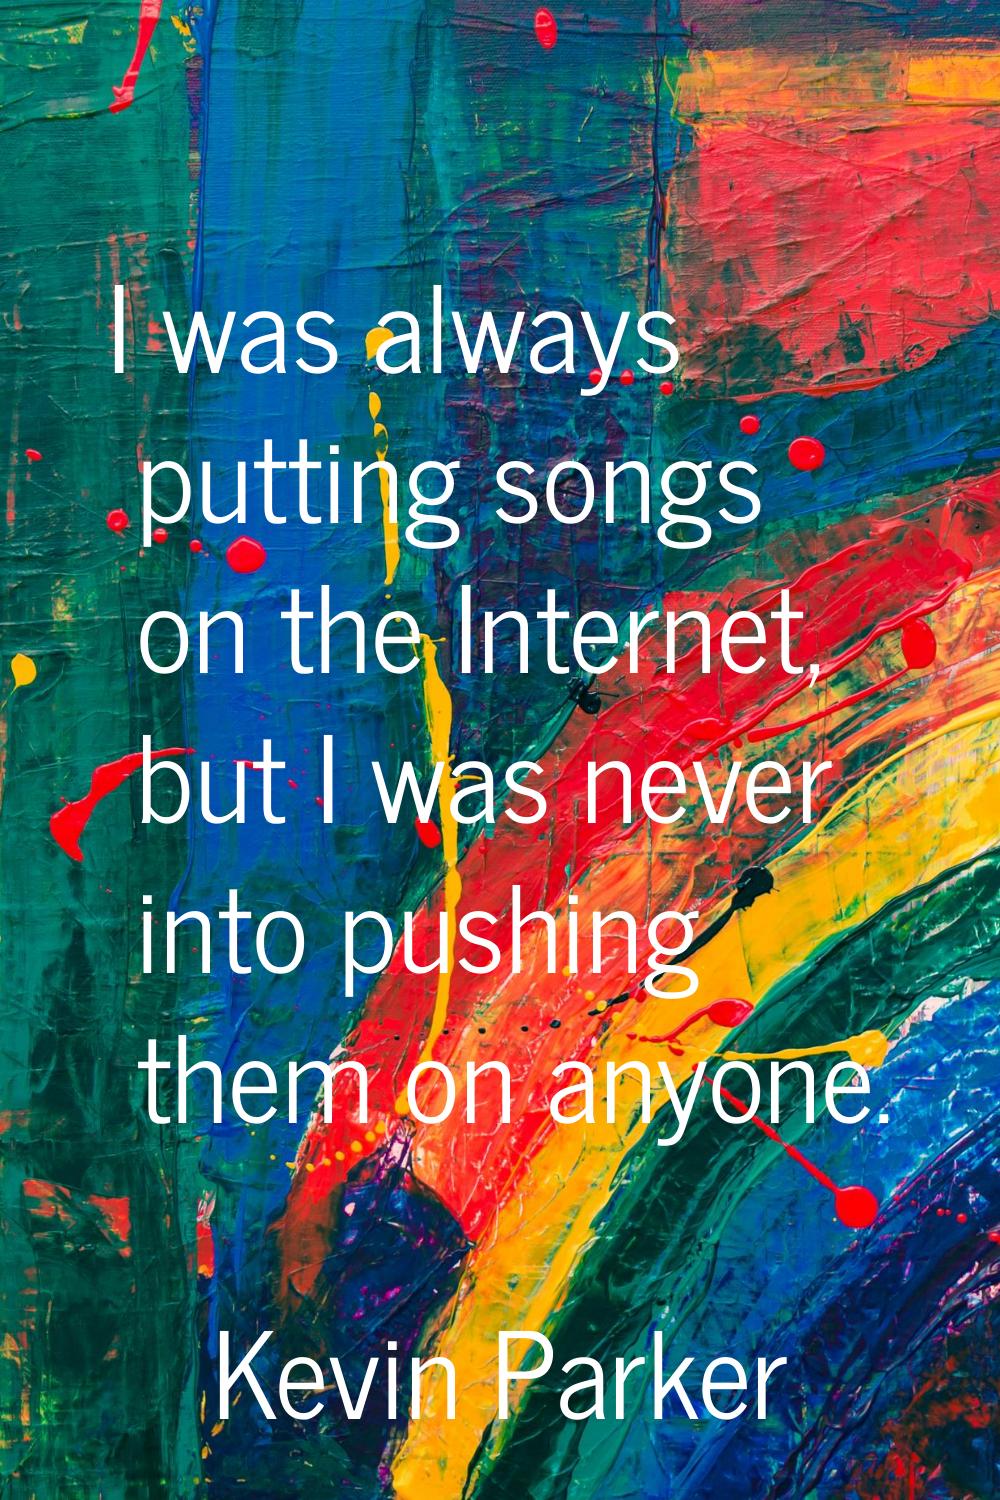 I was always putting songs on the Internet, but I was never into pushing them on anyone.